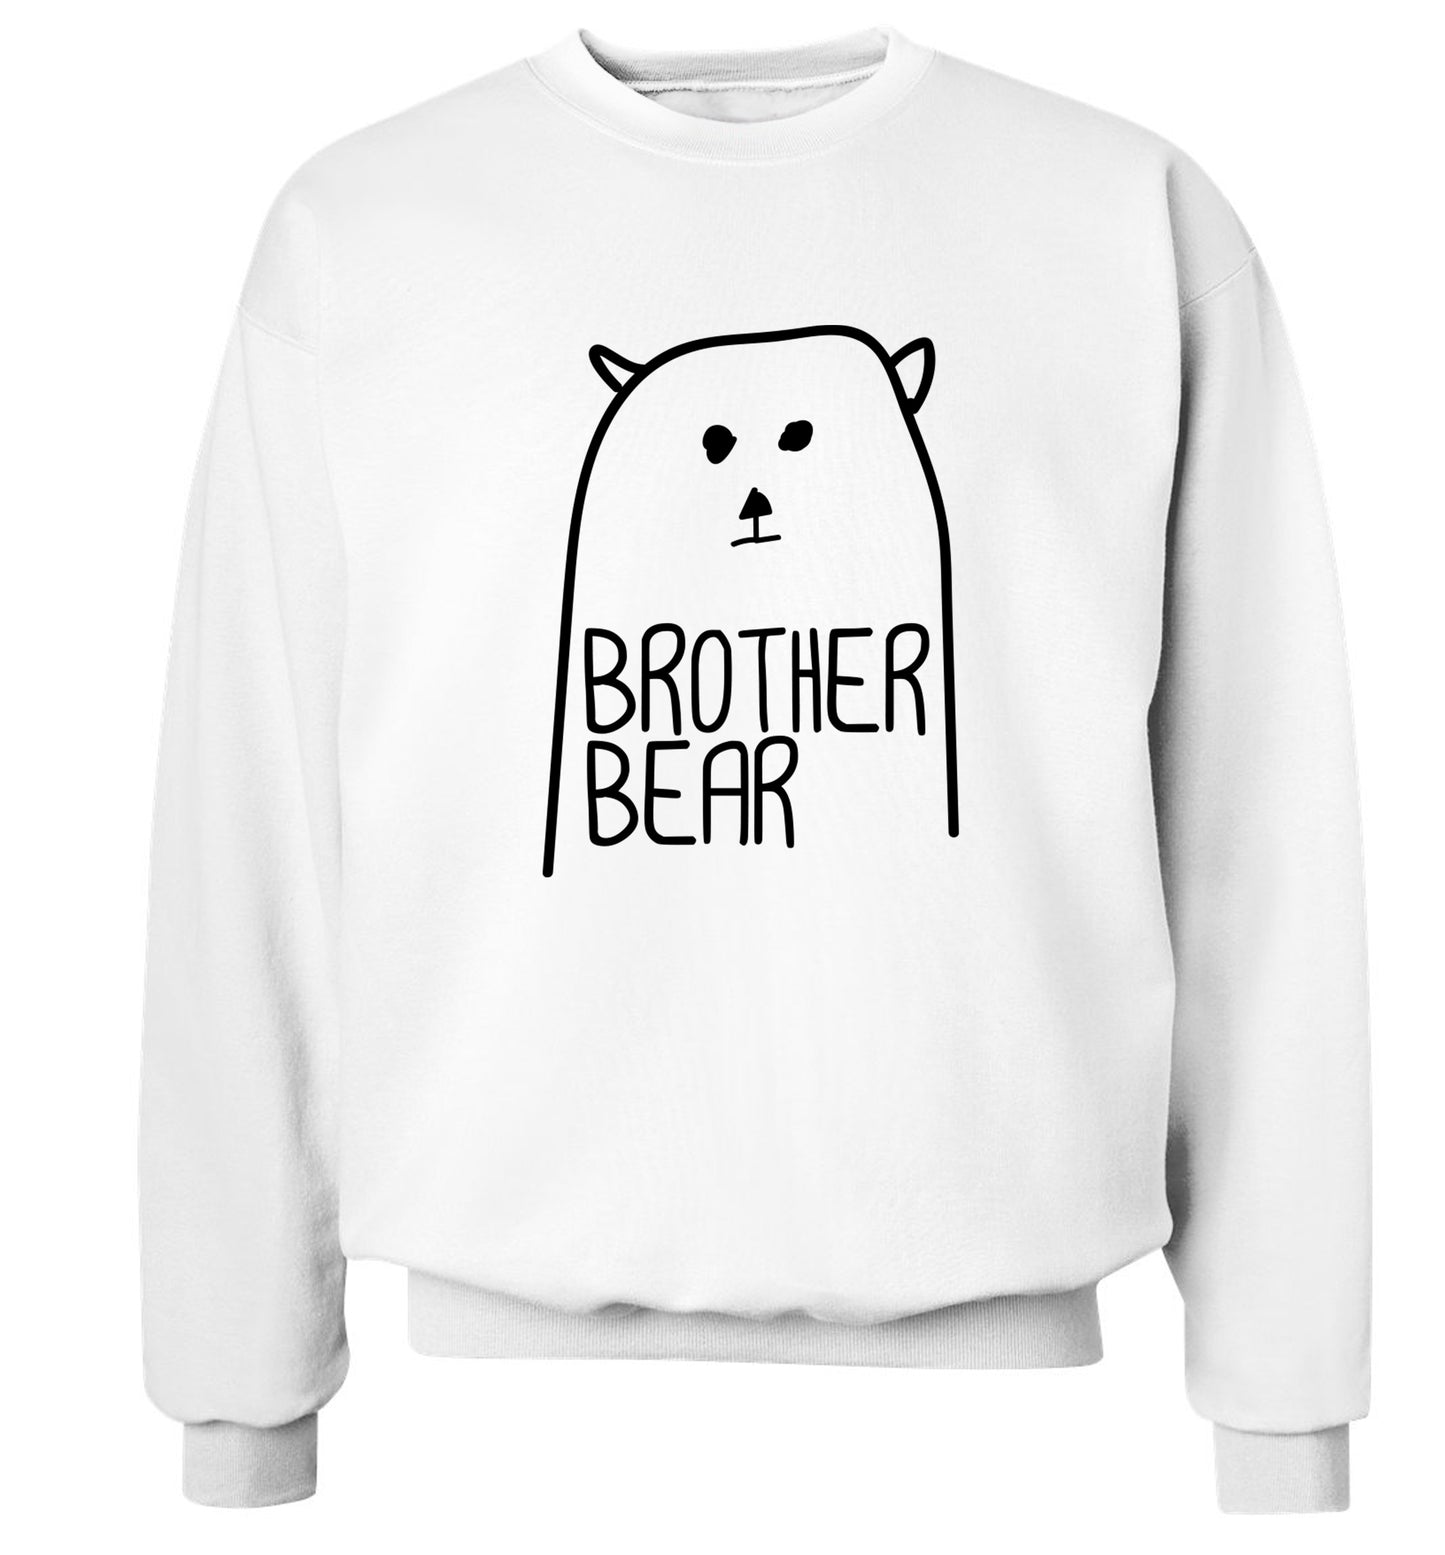 Brother bear Adult's unisex white Sweater 2XL